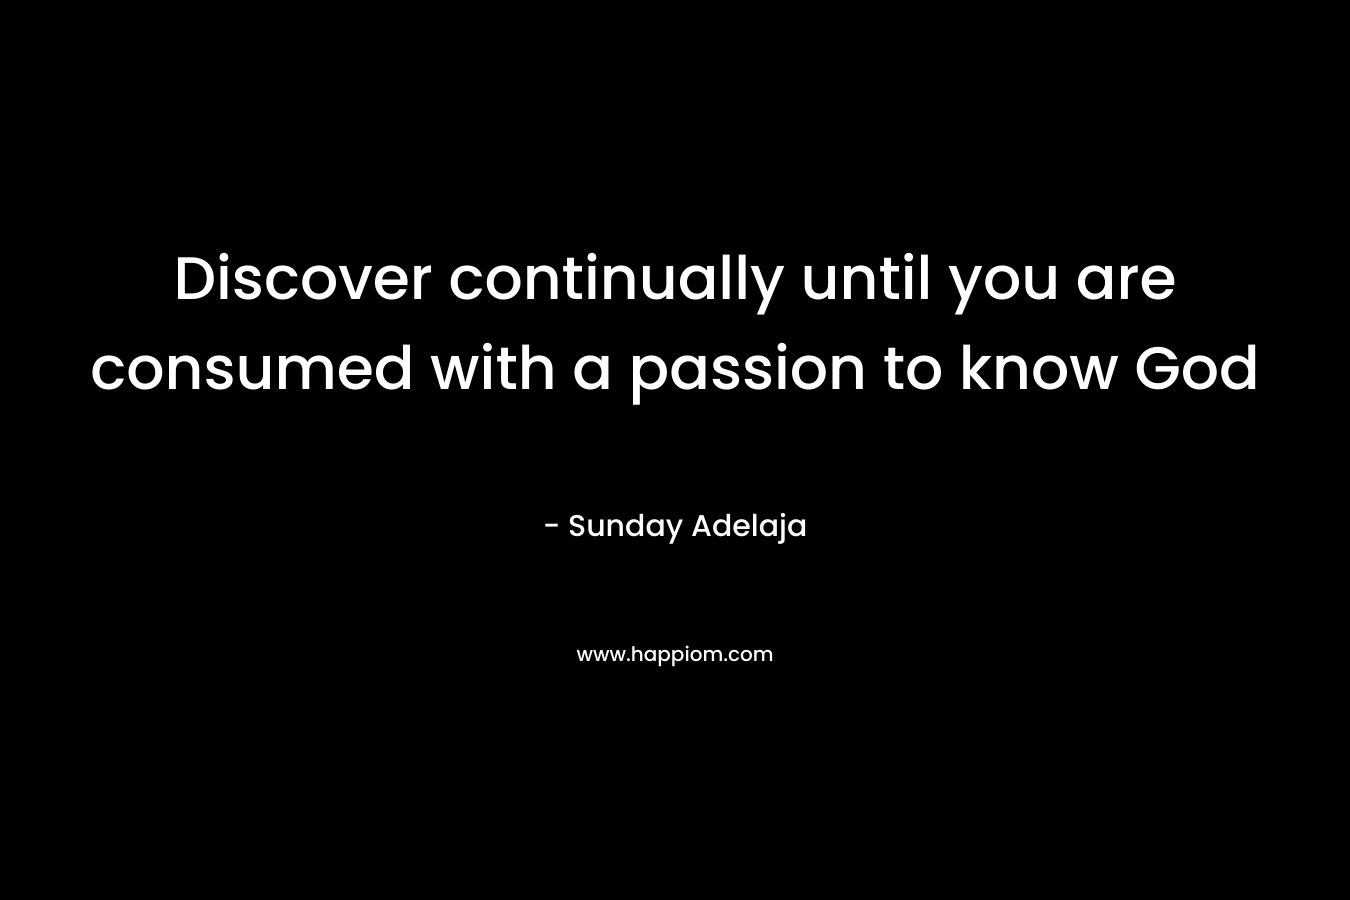 Discover continually until you are consumed with a passion to know God